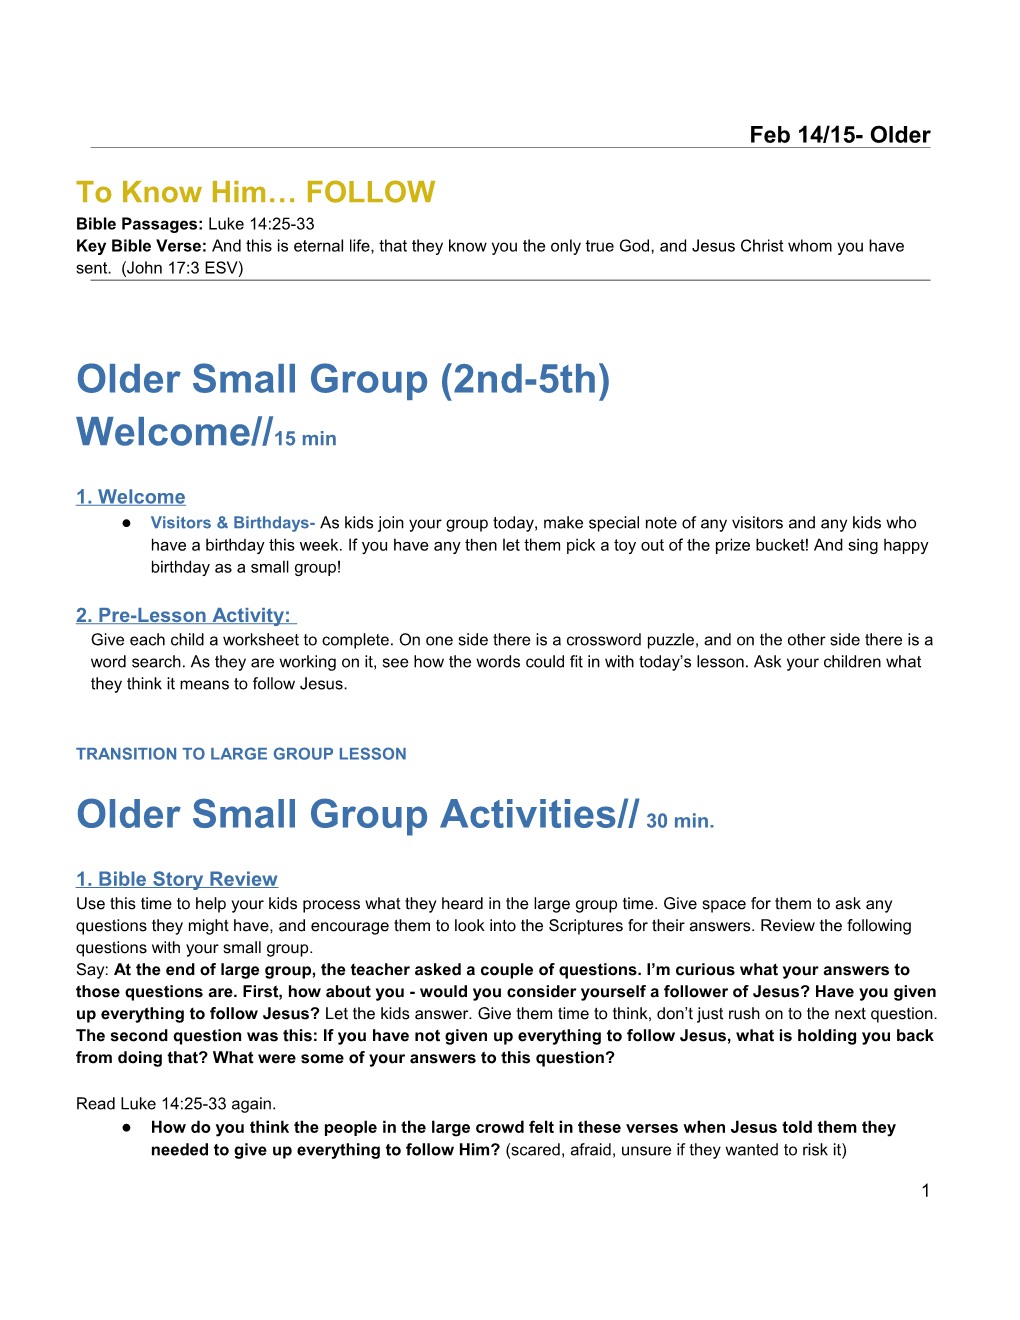 Follow- Older Small Group